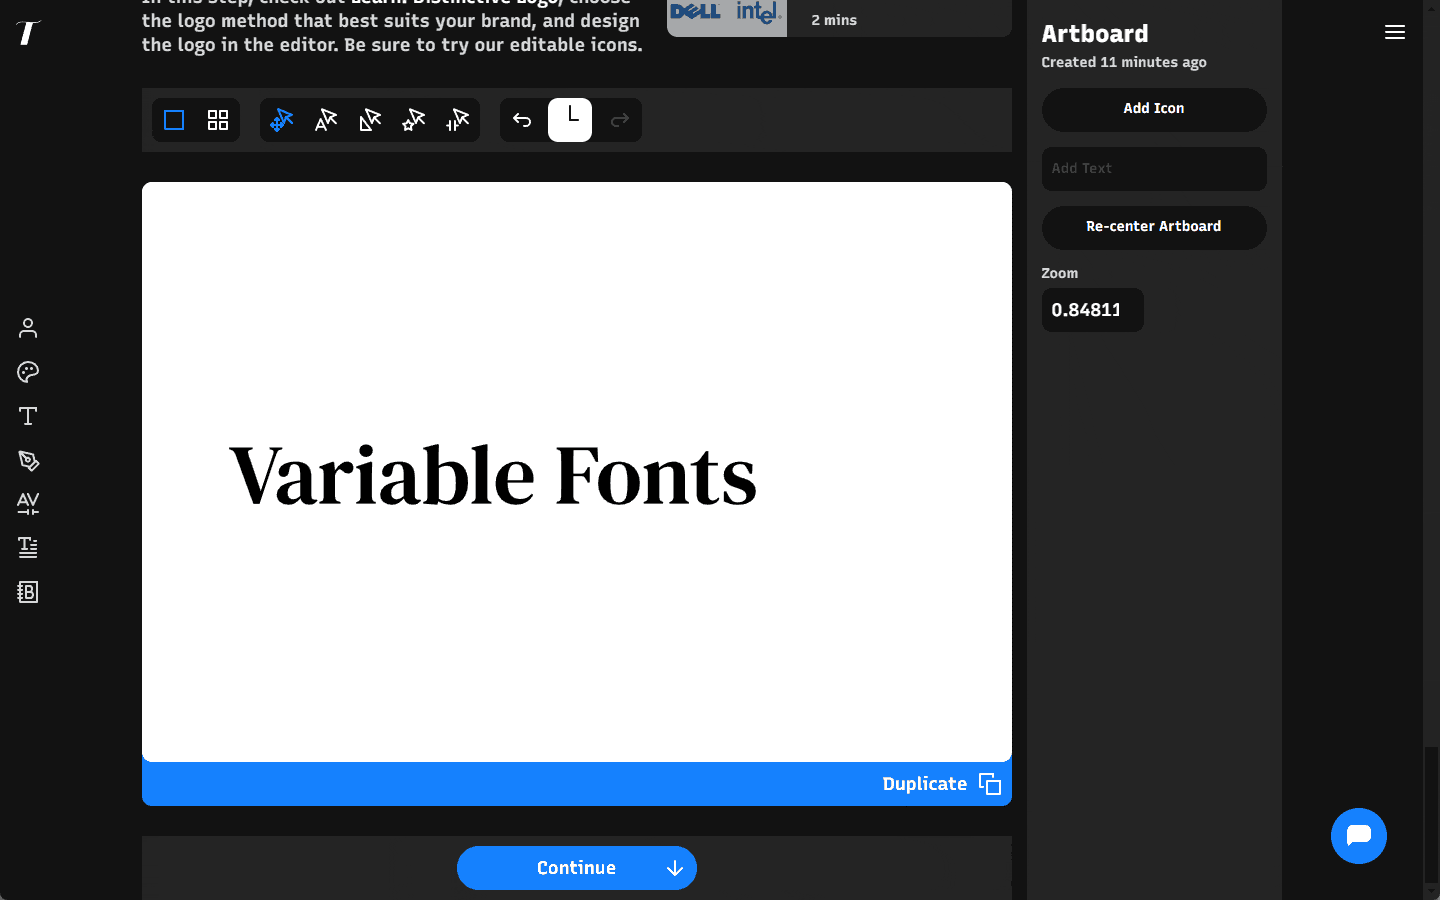 Variable Fonts Support allows for precise adjustments of weight and other variable properties with an intuitive slider control.